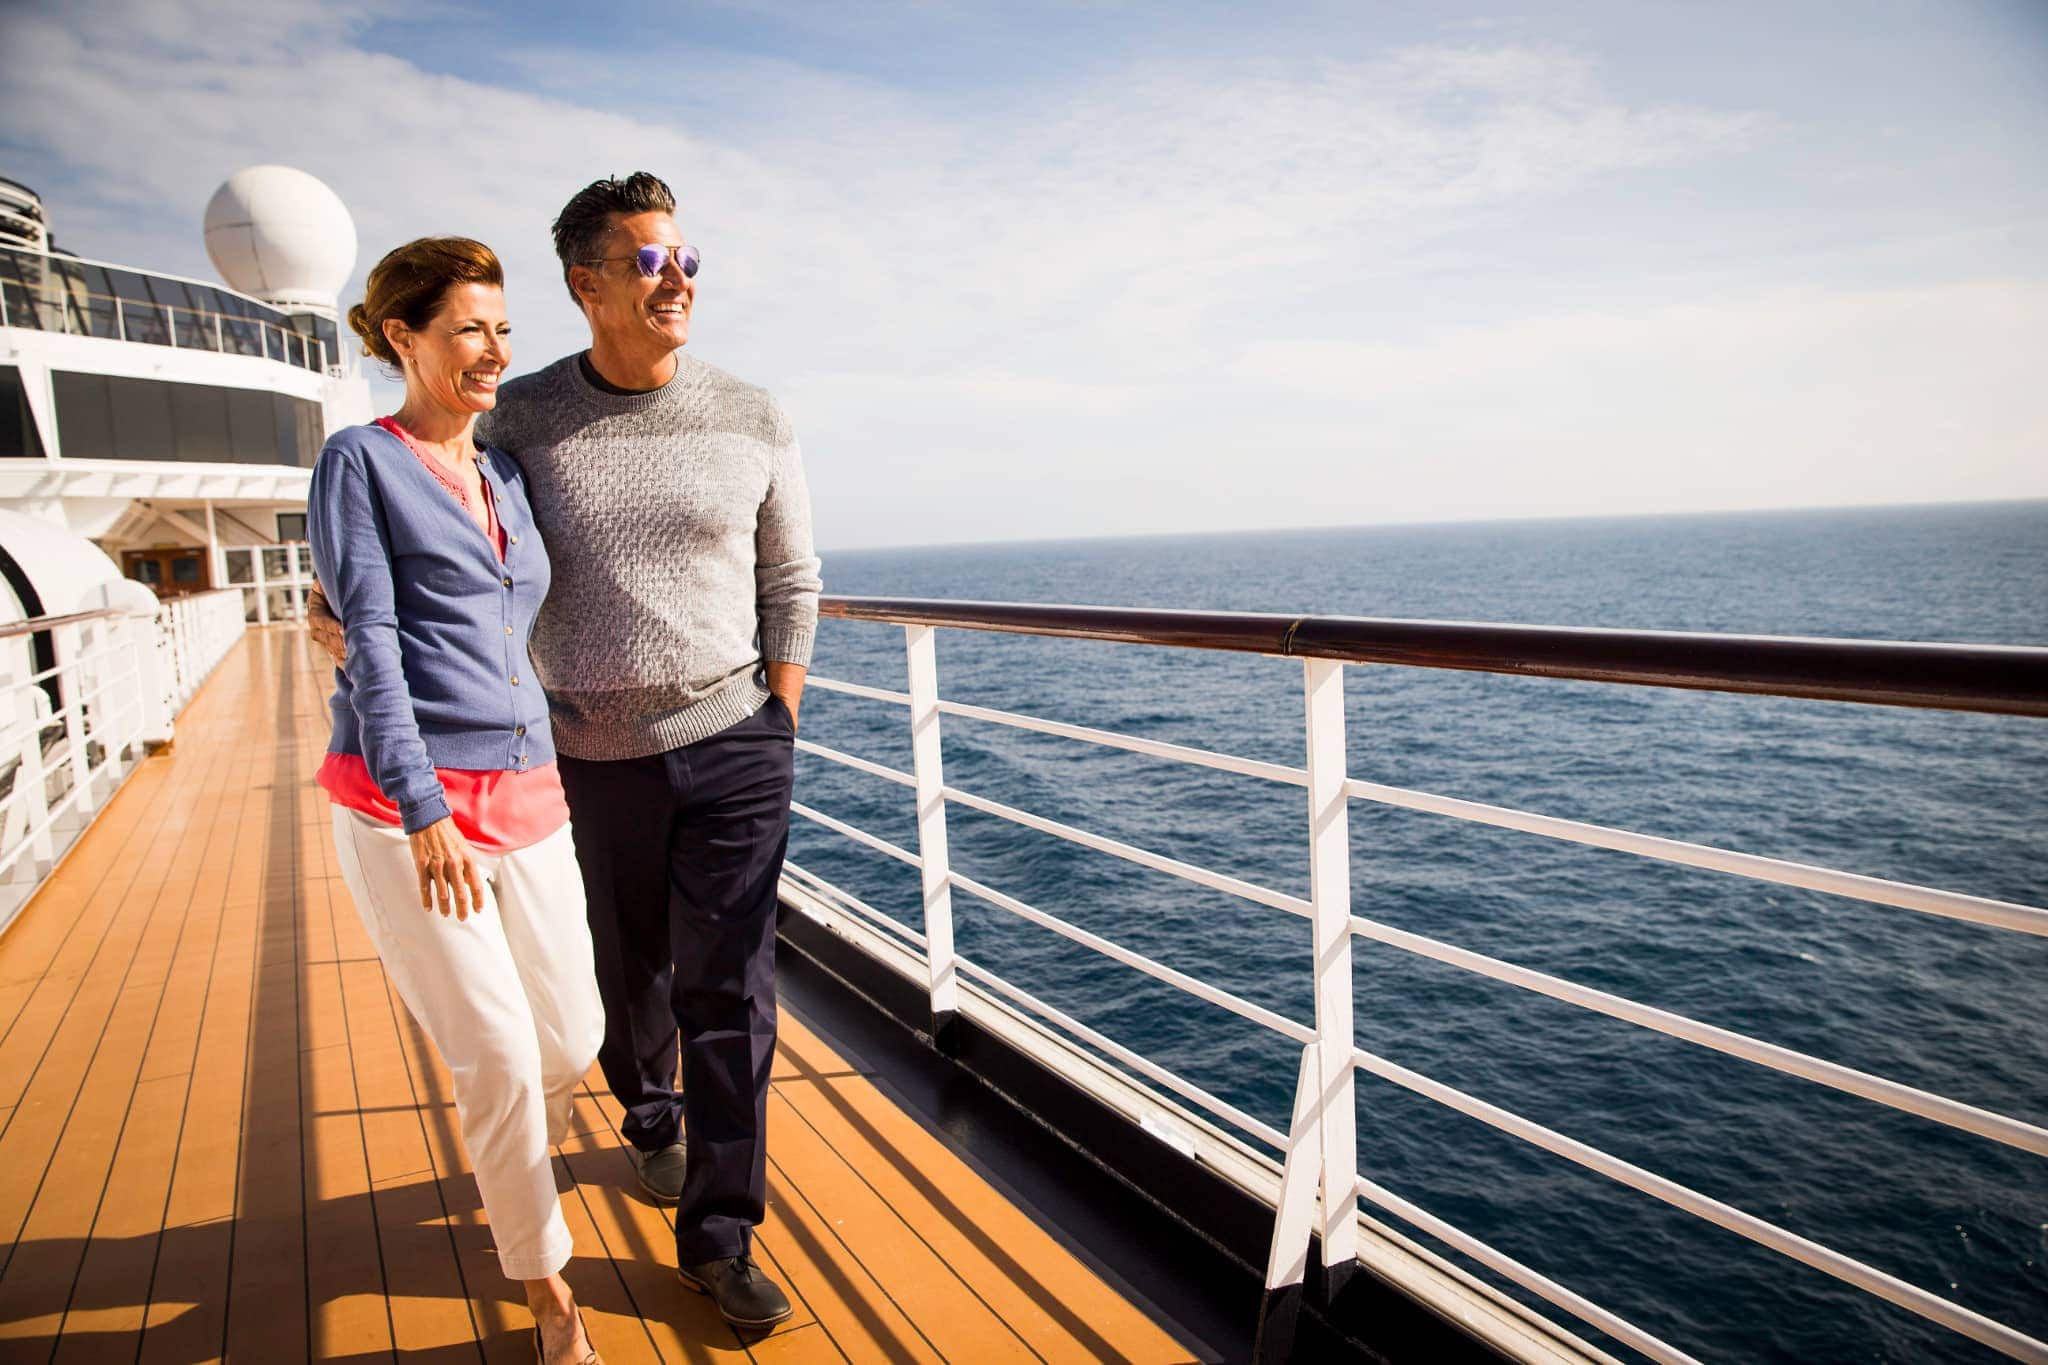 Post: Top 5 Tips for Making the Most of Your First Day On Board